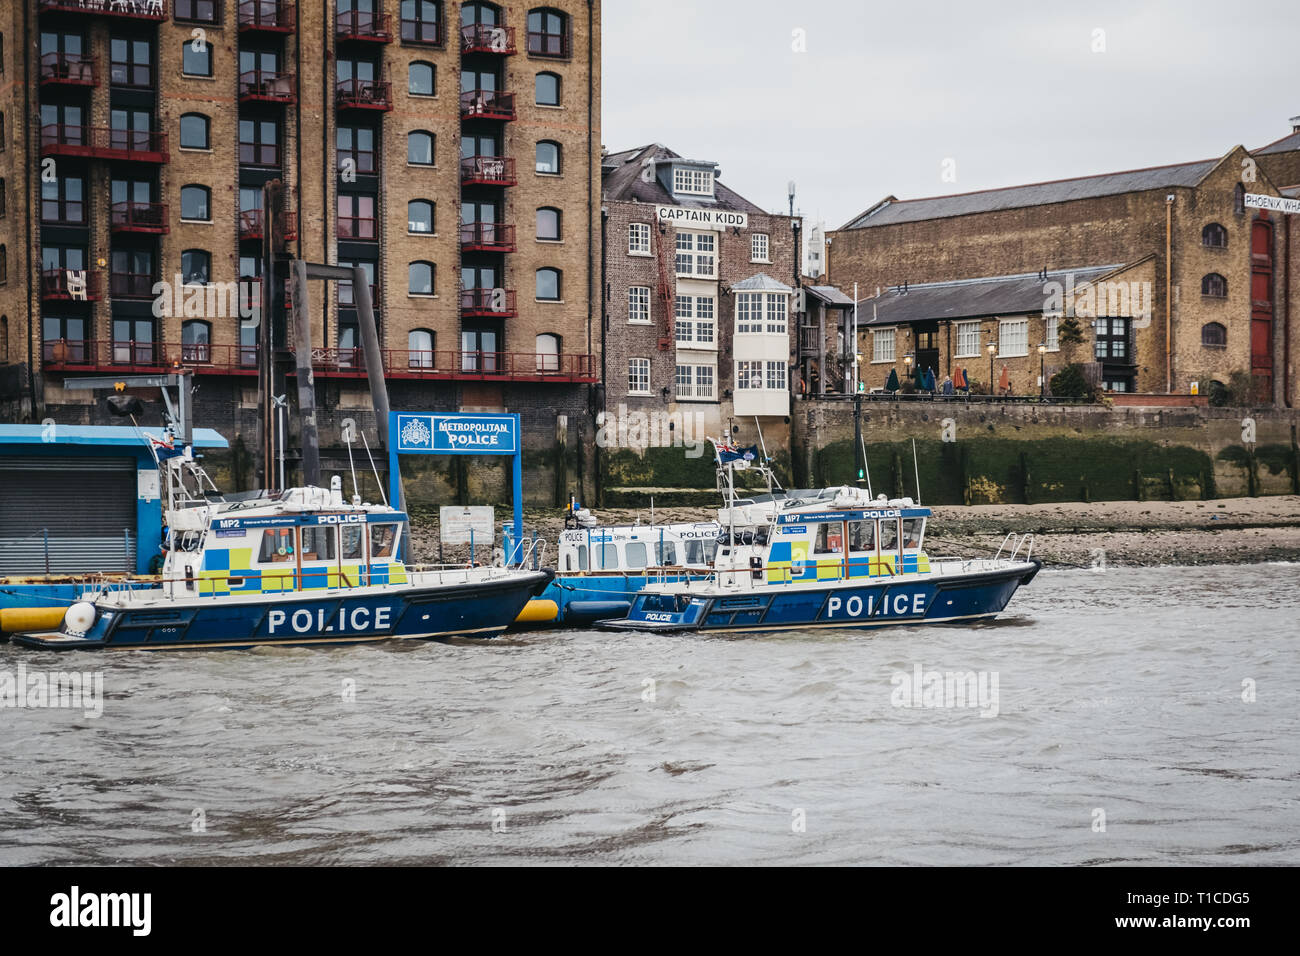 London, UK - March 16, 2019: Metropolitan Police Marine Policing Unit (MPU) on the River Thames in London. MPU fleet of vessels is responsible for pol Stock Photo